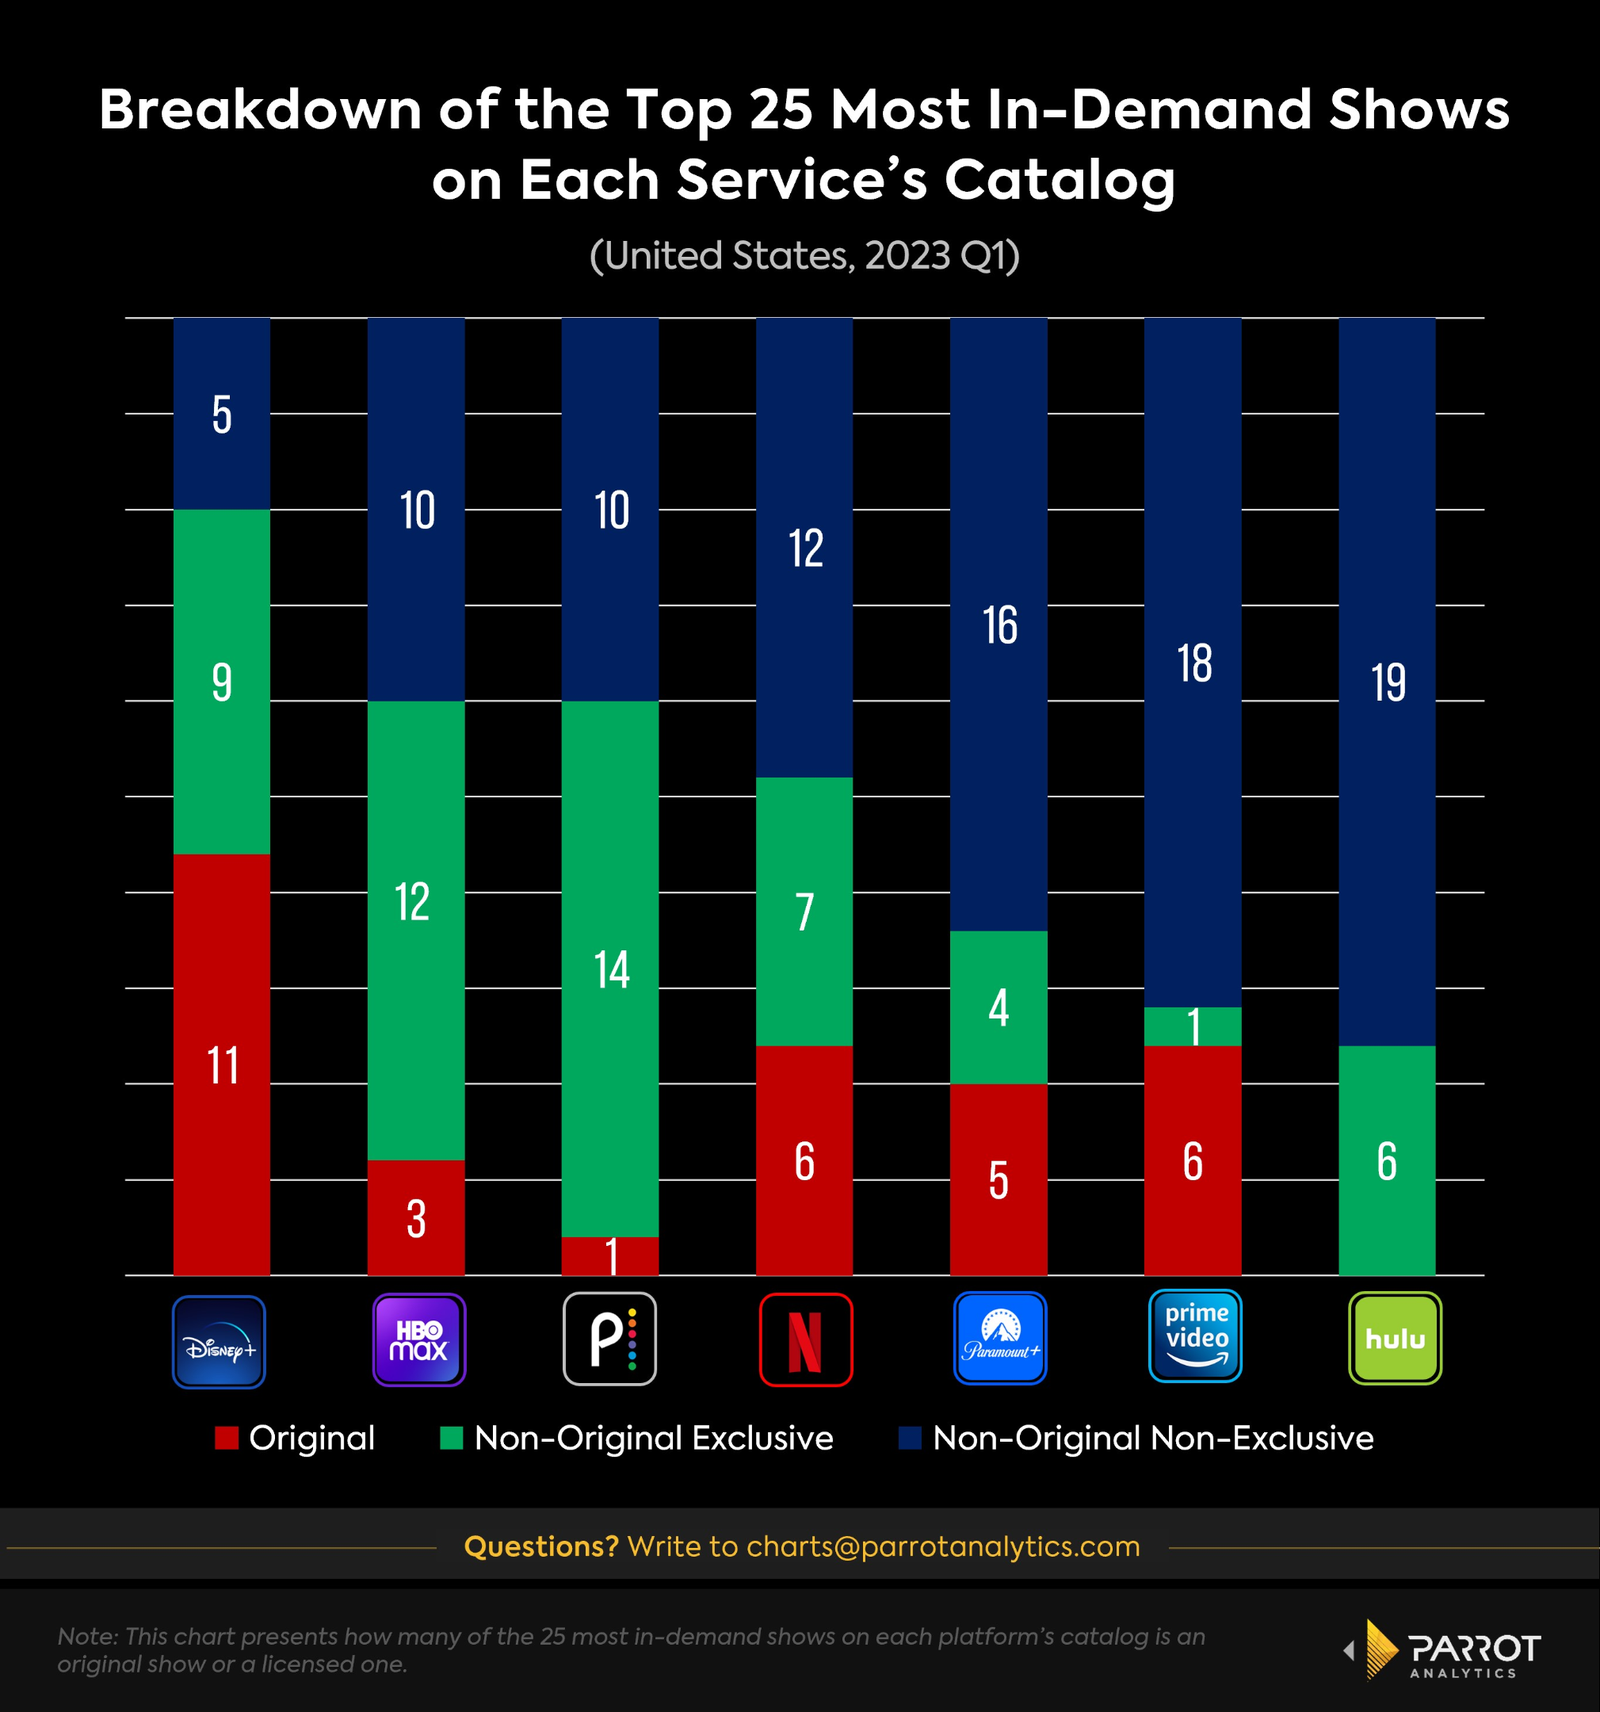 breakdown of the top 25 most in-demand show on each service's catalog